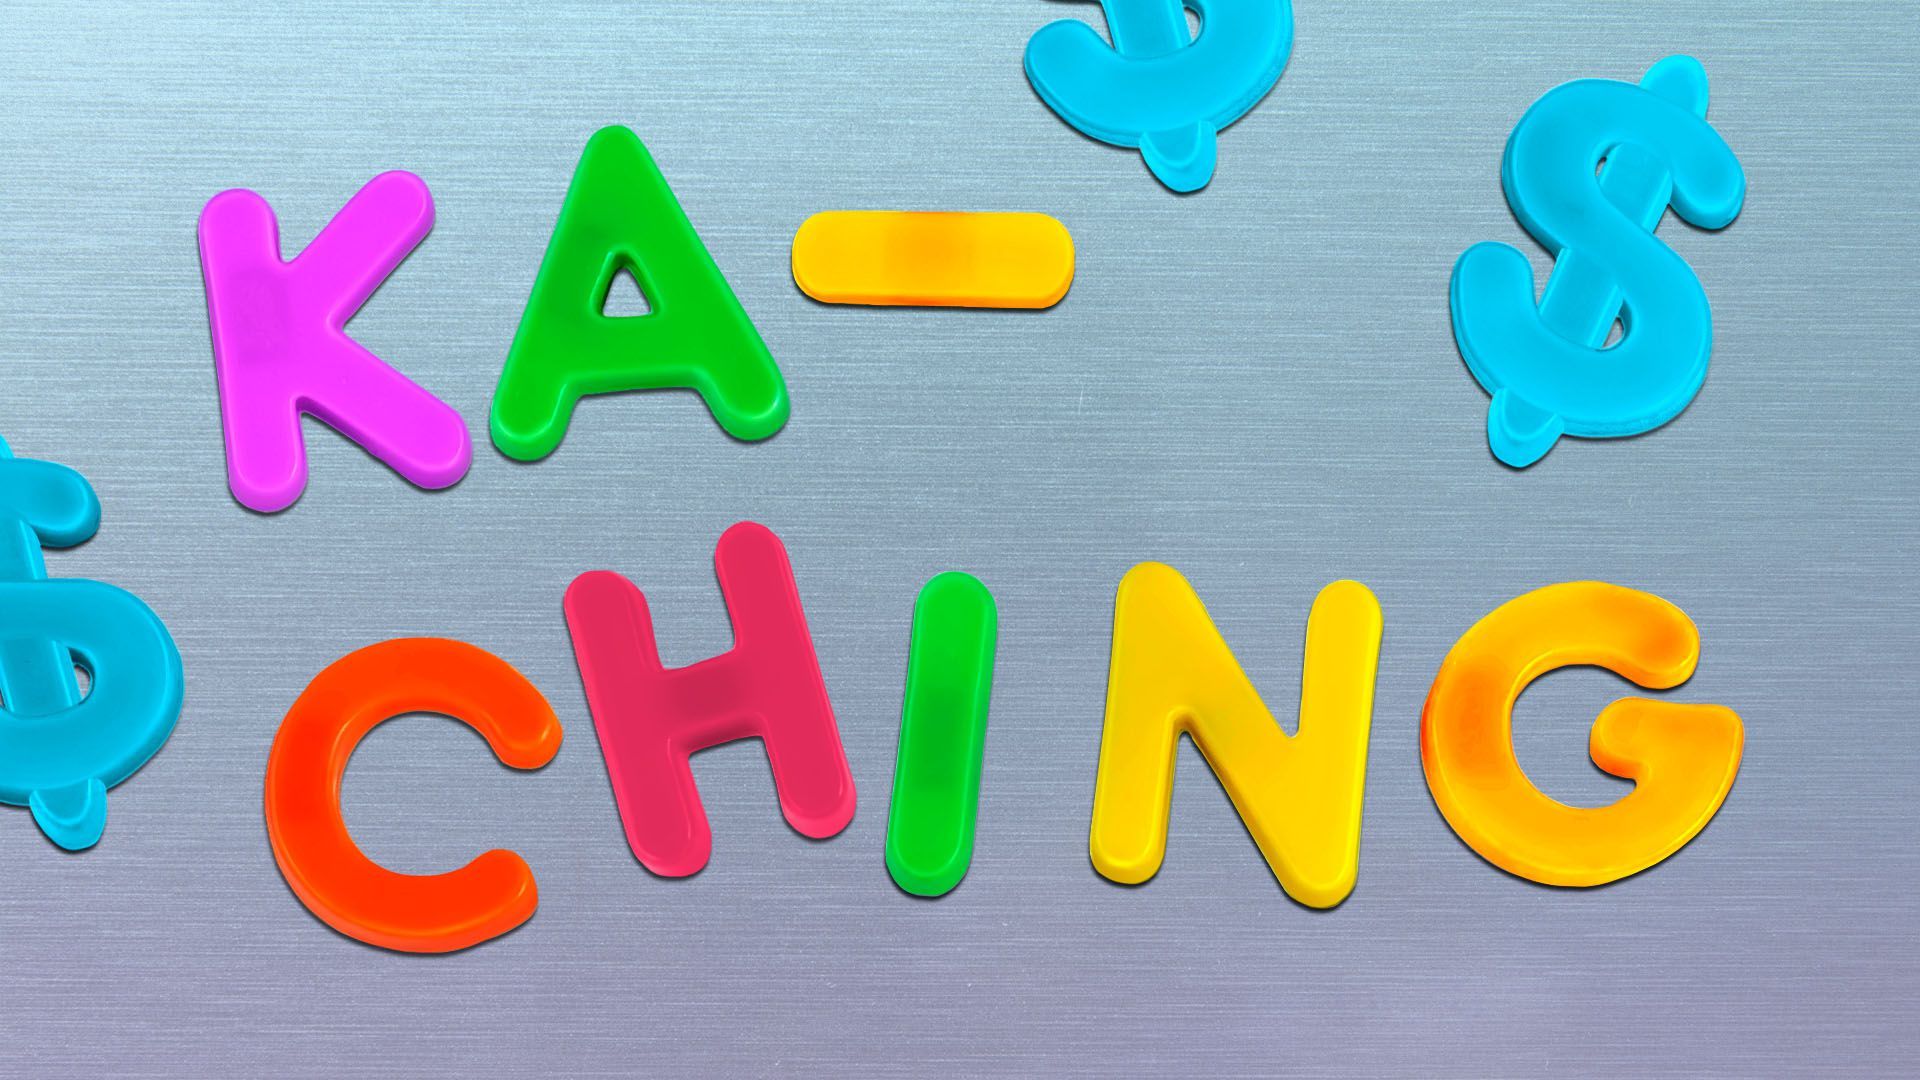 Illustration of a fridge covered in fridge magnet letters spelling out "ka-ching"